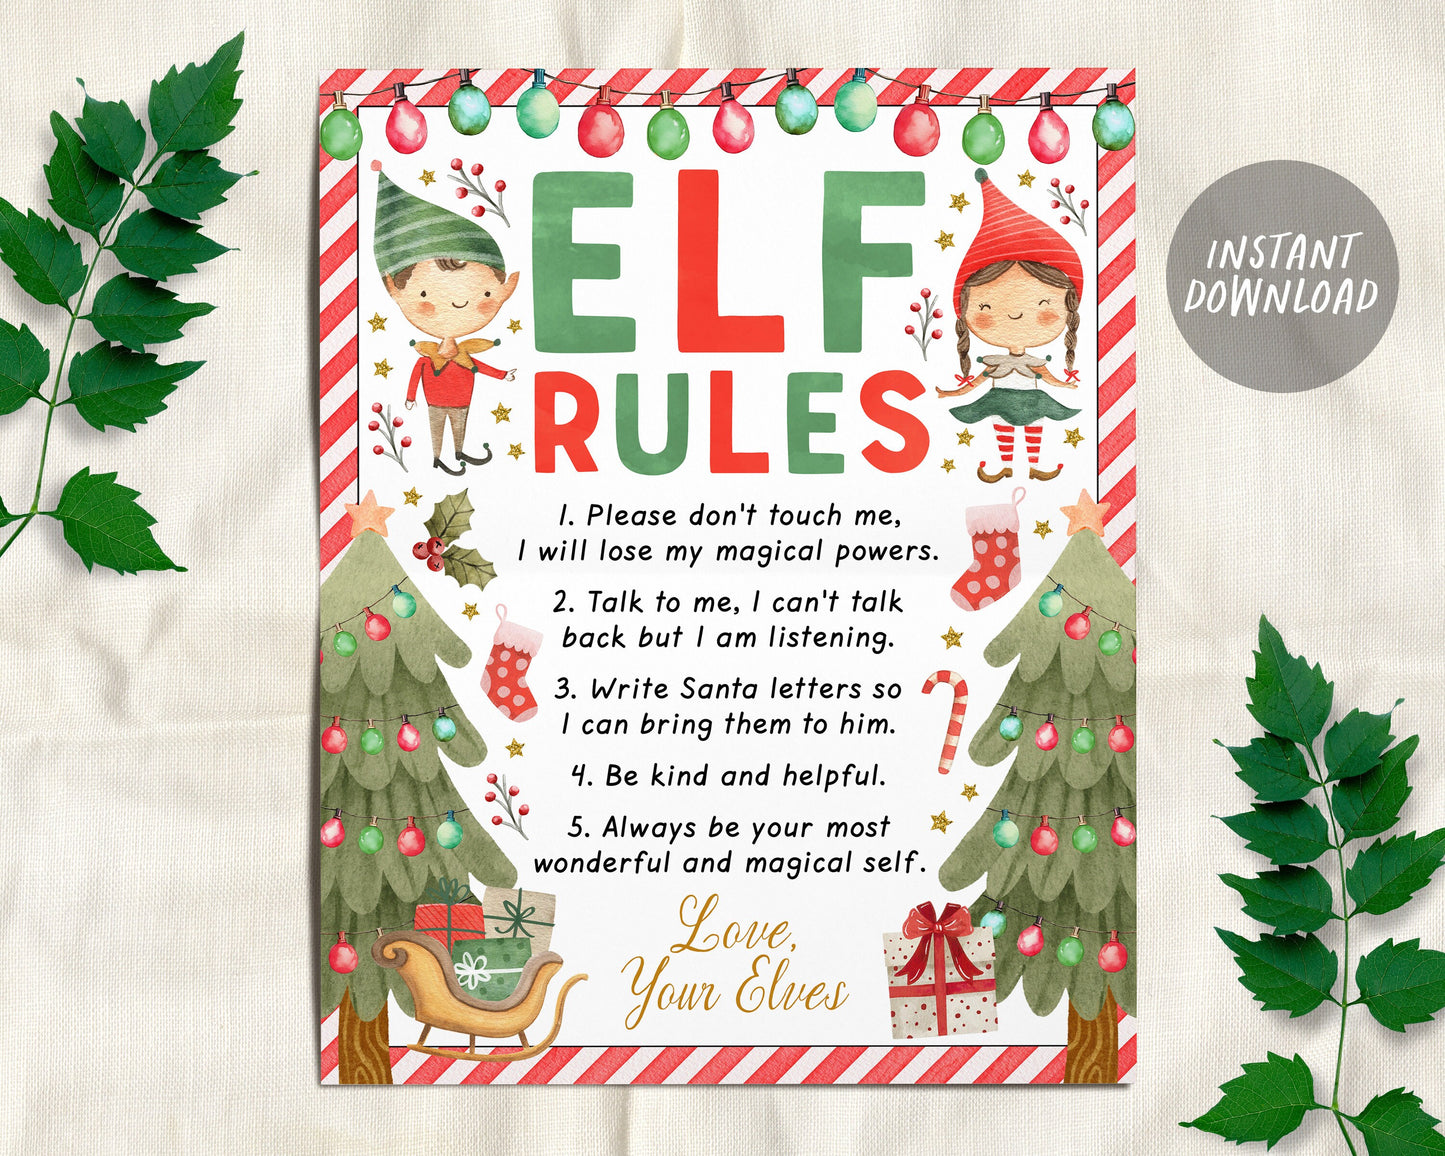 Elf Rules Sign, Elf Rules To Follow, Elf Do Not Touch Me Arrival Christmas Rule, Elves Magic Rules For Kids, Christmas Elf Activity Game DIY